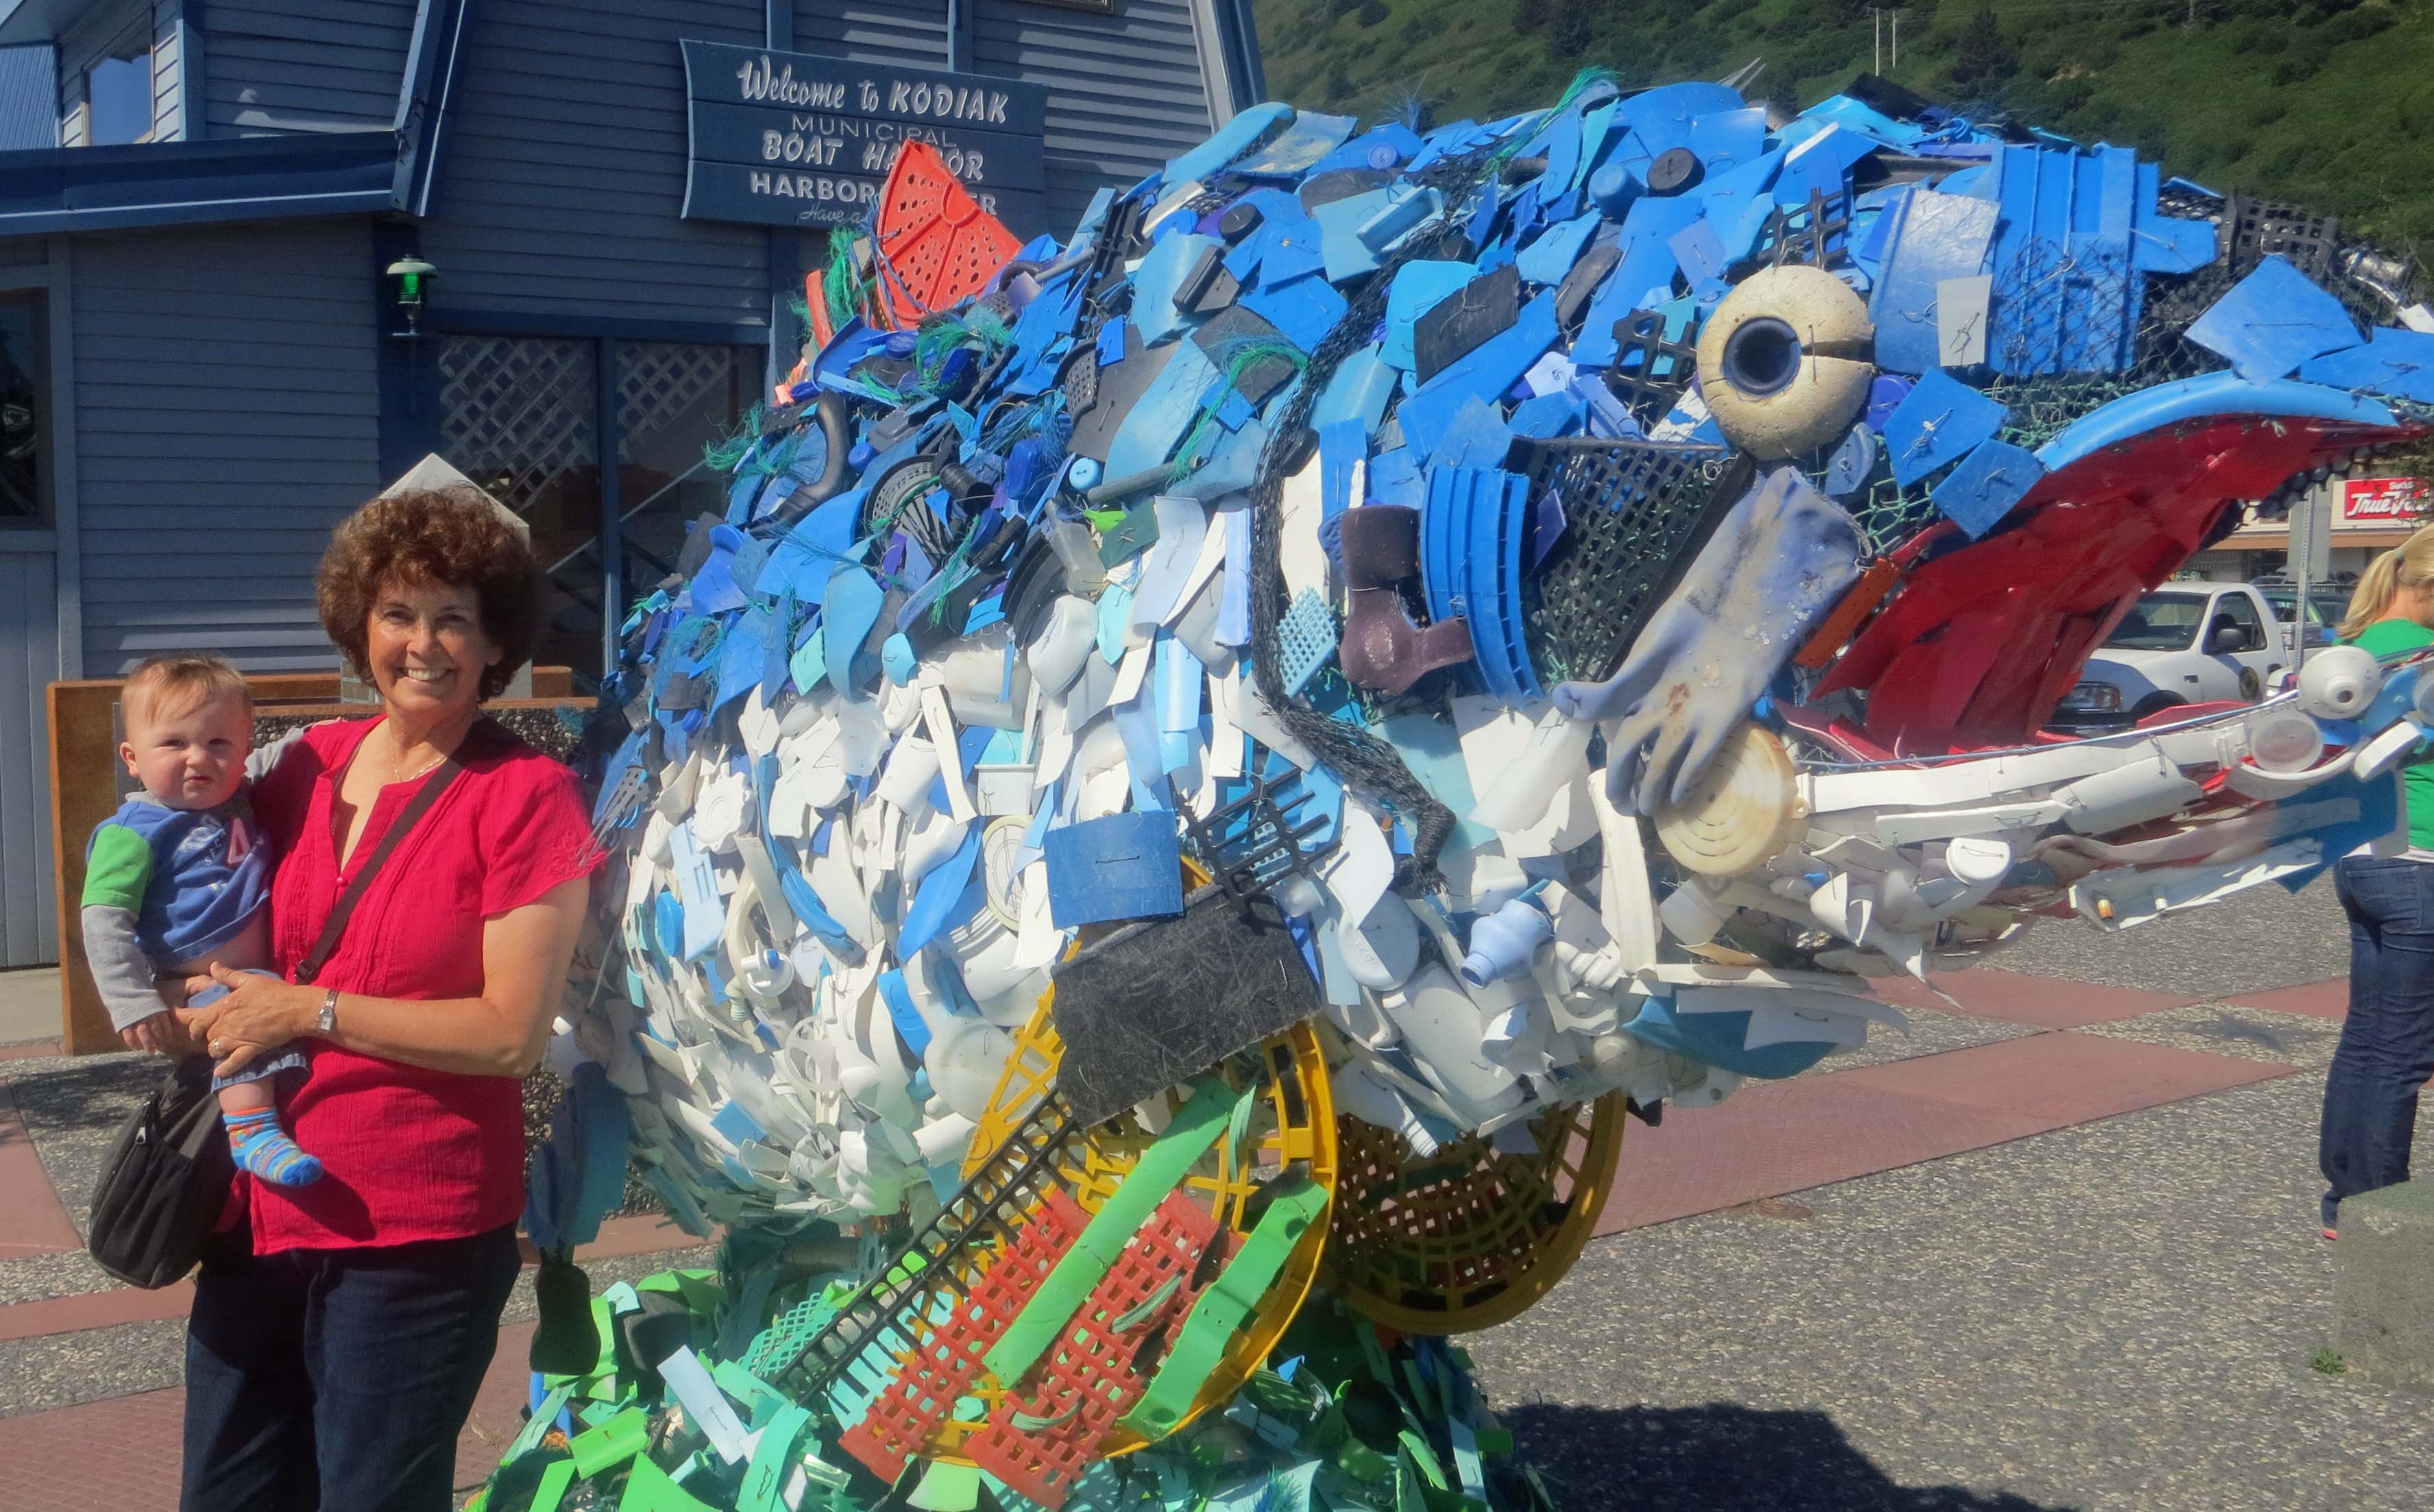 Peggy poses with out youngest grandson, Cooper in front of the Harbor Masters office in Kodiak. The large fish is a sculpture made from trash collected from the ocean. Hopefully Cooper will grow up in a world with less trash.